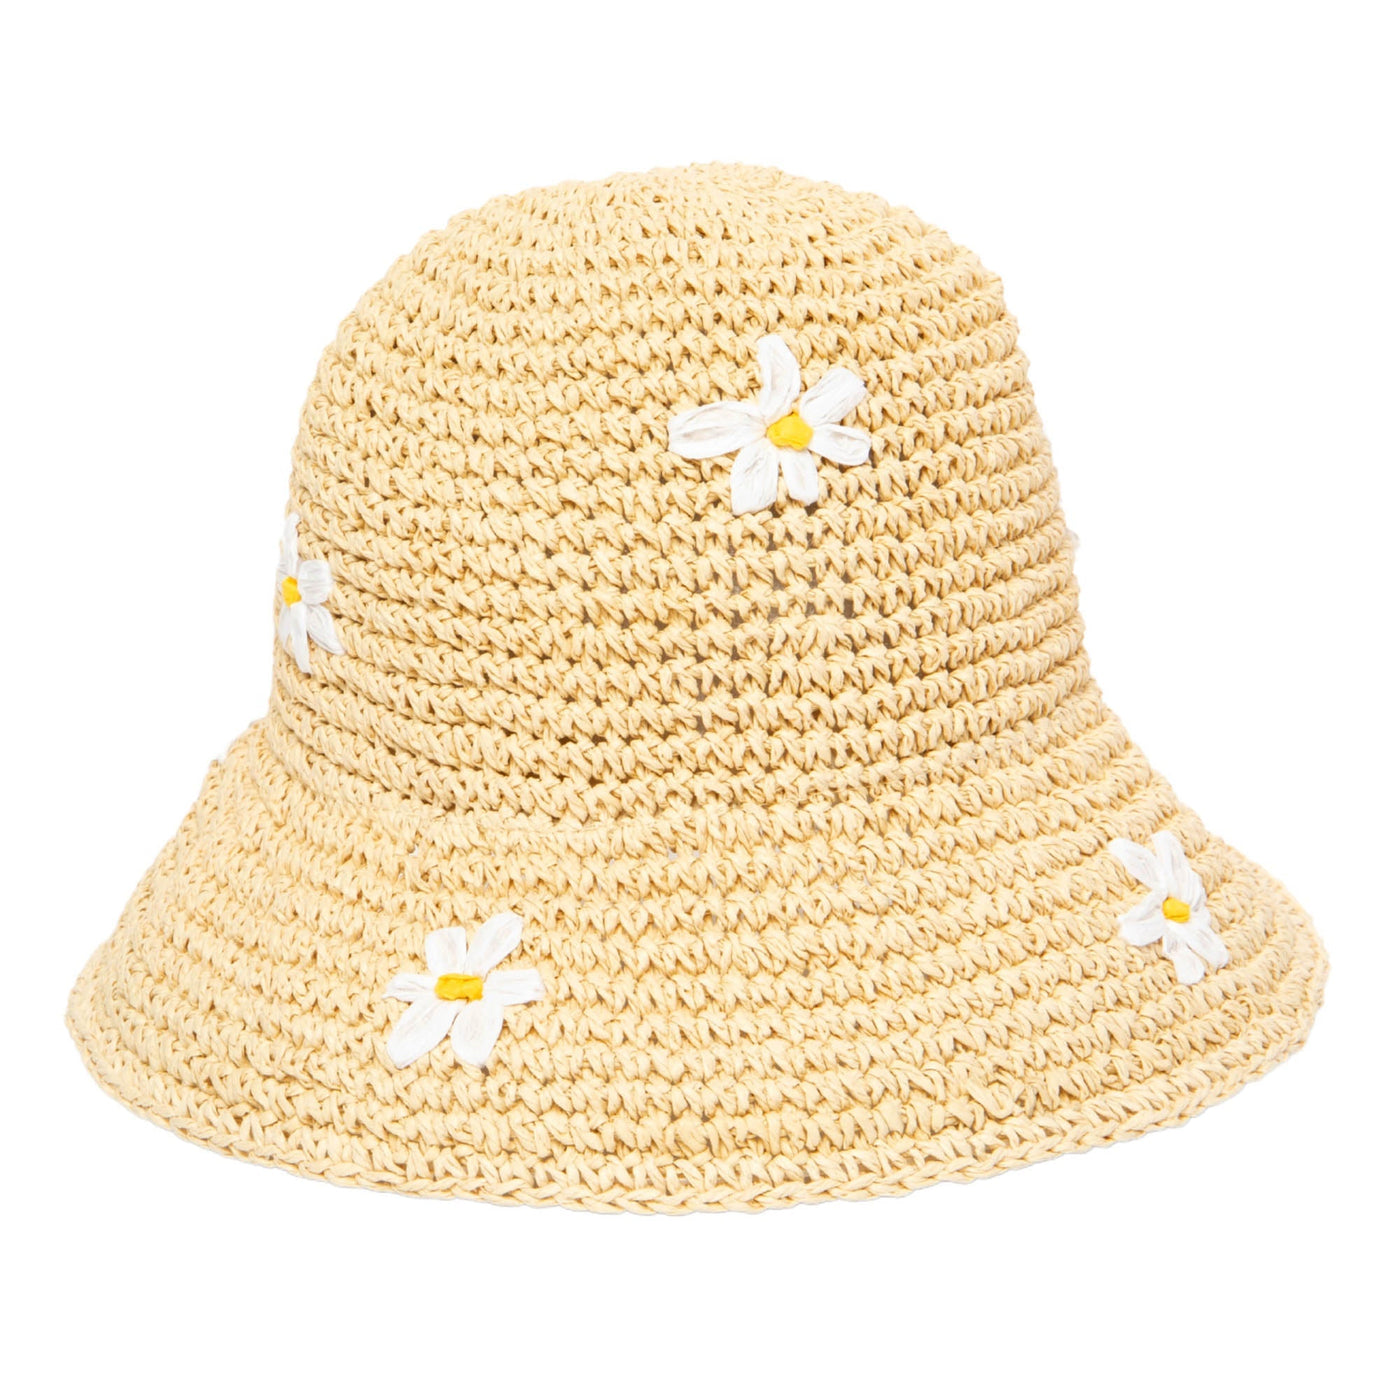 BUCKET - Mommy And Me Crochet Bucket Hat With Embroidery